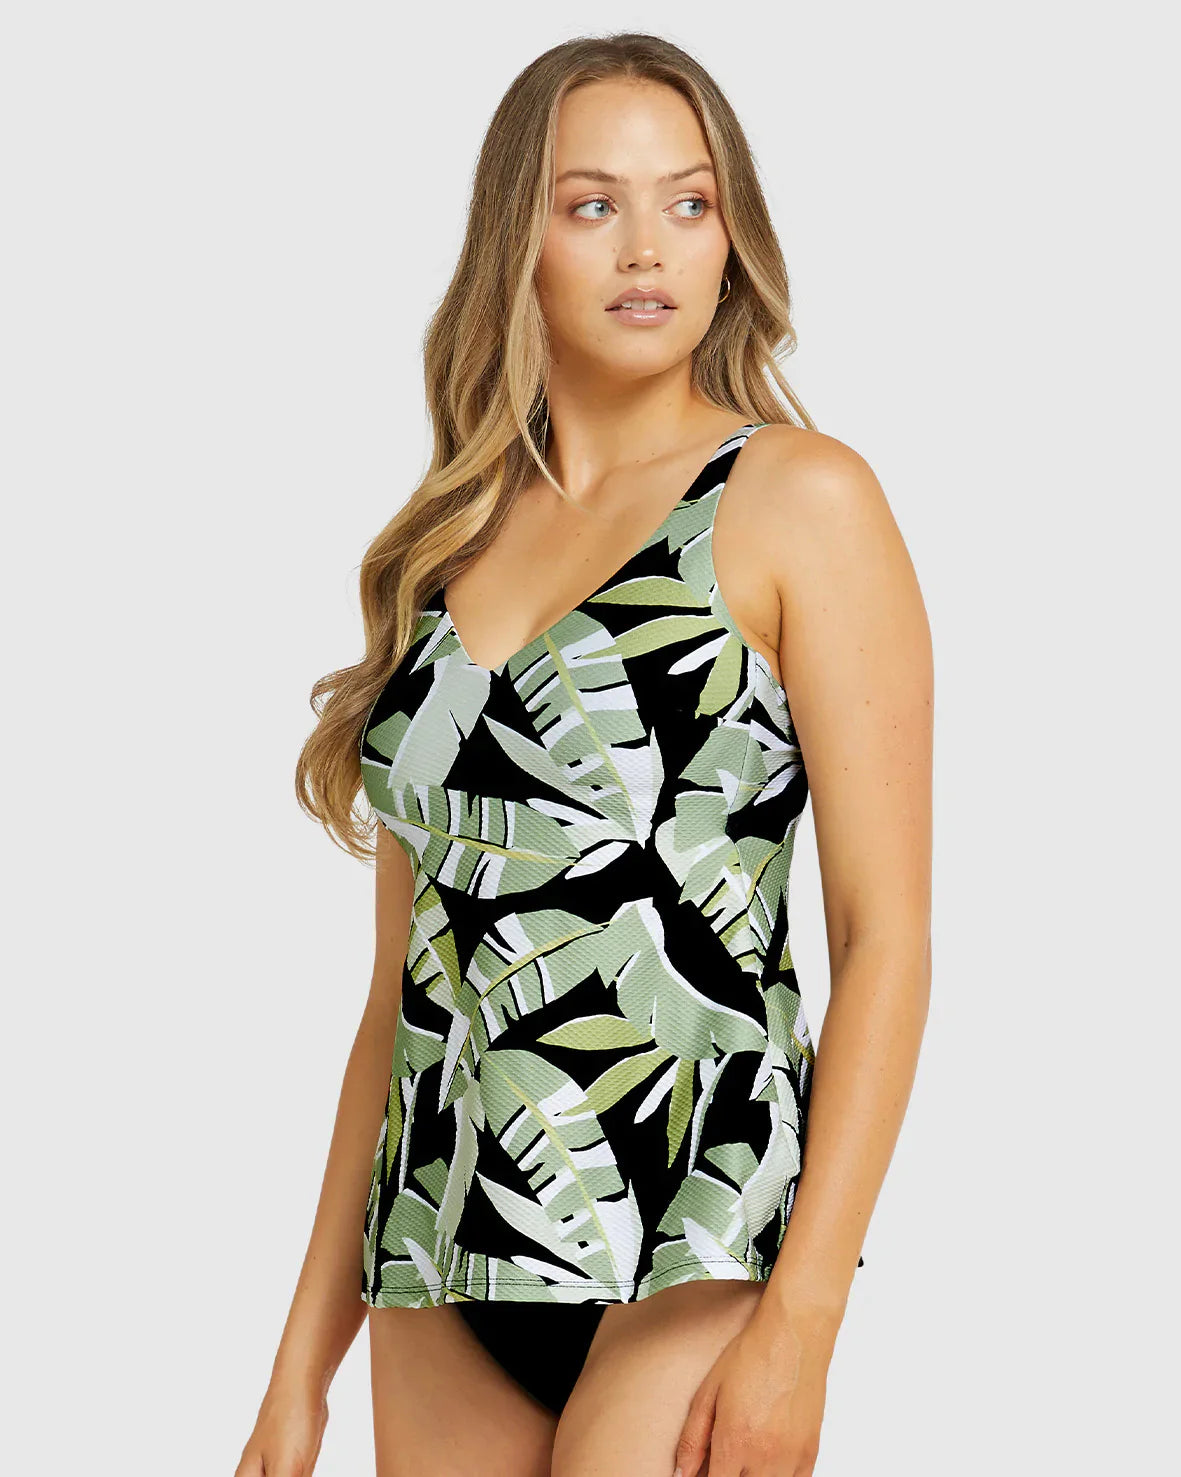 Splash your way into style with the Baku Canary Islands D-E Cup Tankini! This sophisticated two-piece set offers subtle tonal colors, abstract palm prints, and a daring dropped neckline with a V-shape, ensuring you look good without compromising on comfort. It comes complete with hidden wire, boning and shelf support for a larger bust. Now you can strut your stuff at the pool (or beach) with confidence!